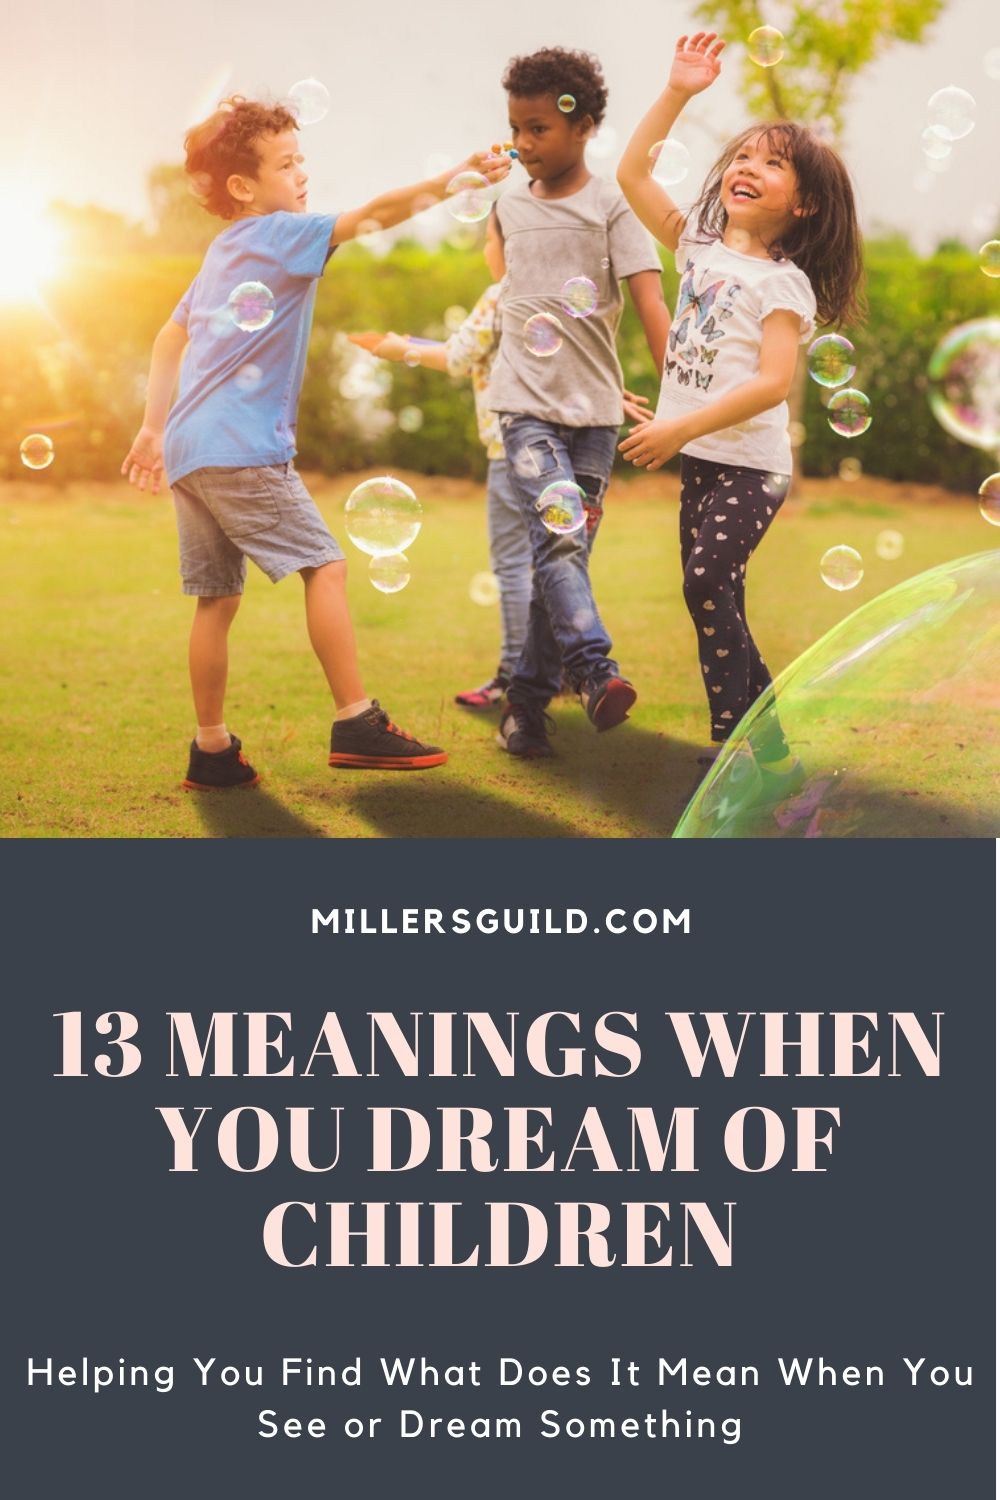 13 Meanings When You Dream of Children 2